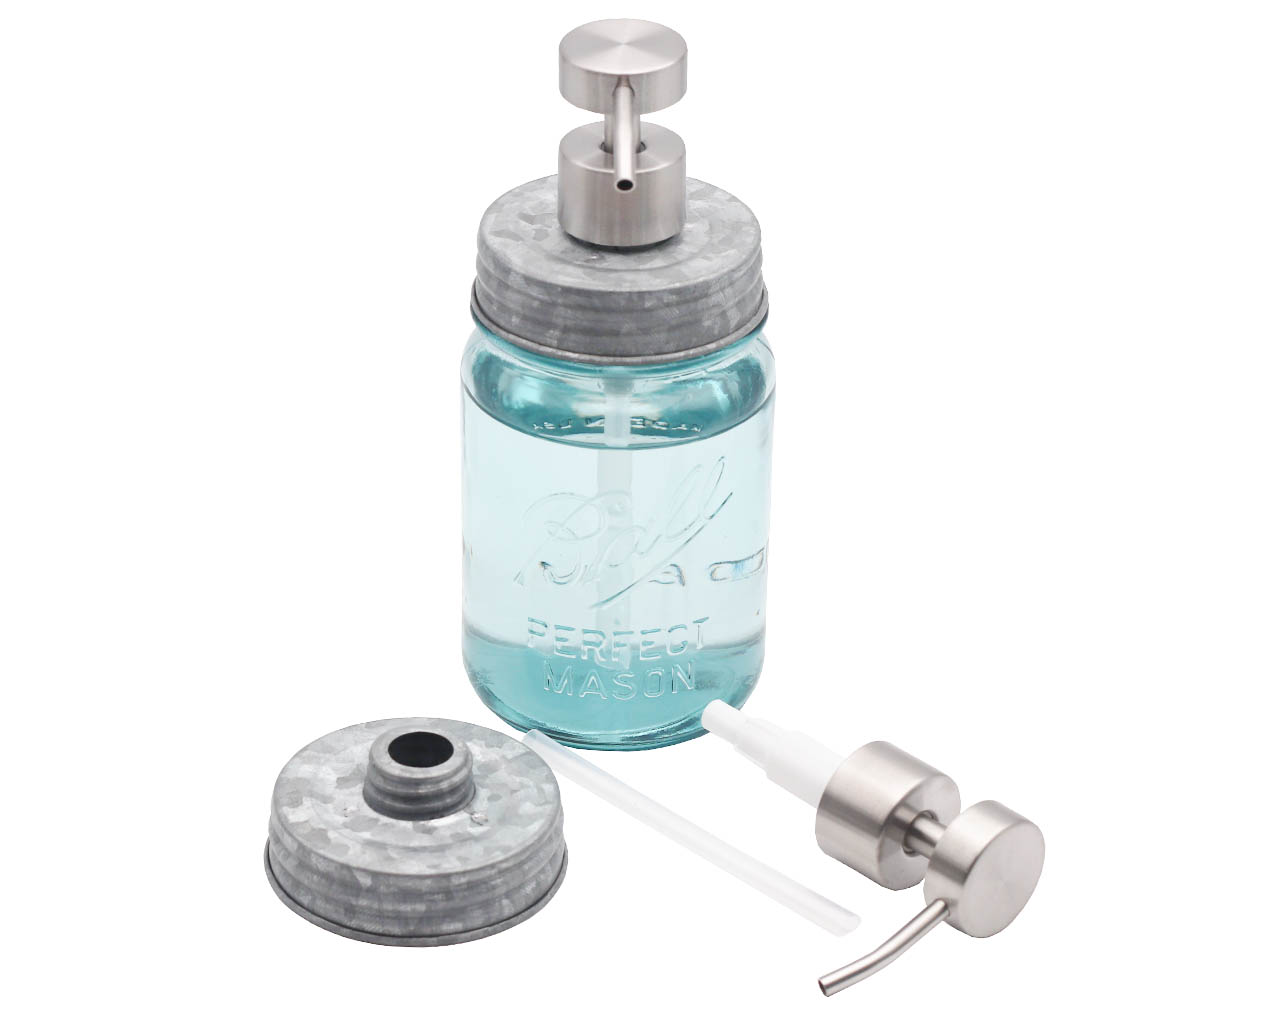 Threaded Brushed Stainless Steel/Matte Satin Soap Dispenser with Galvanized Lid for Regular Mouth Mason Jars Style #2